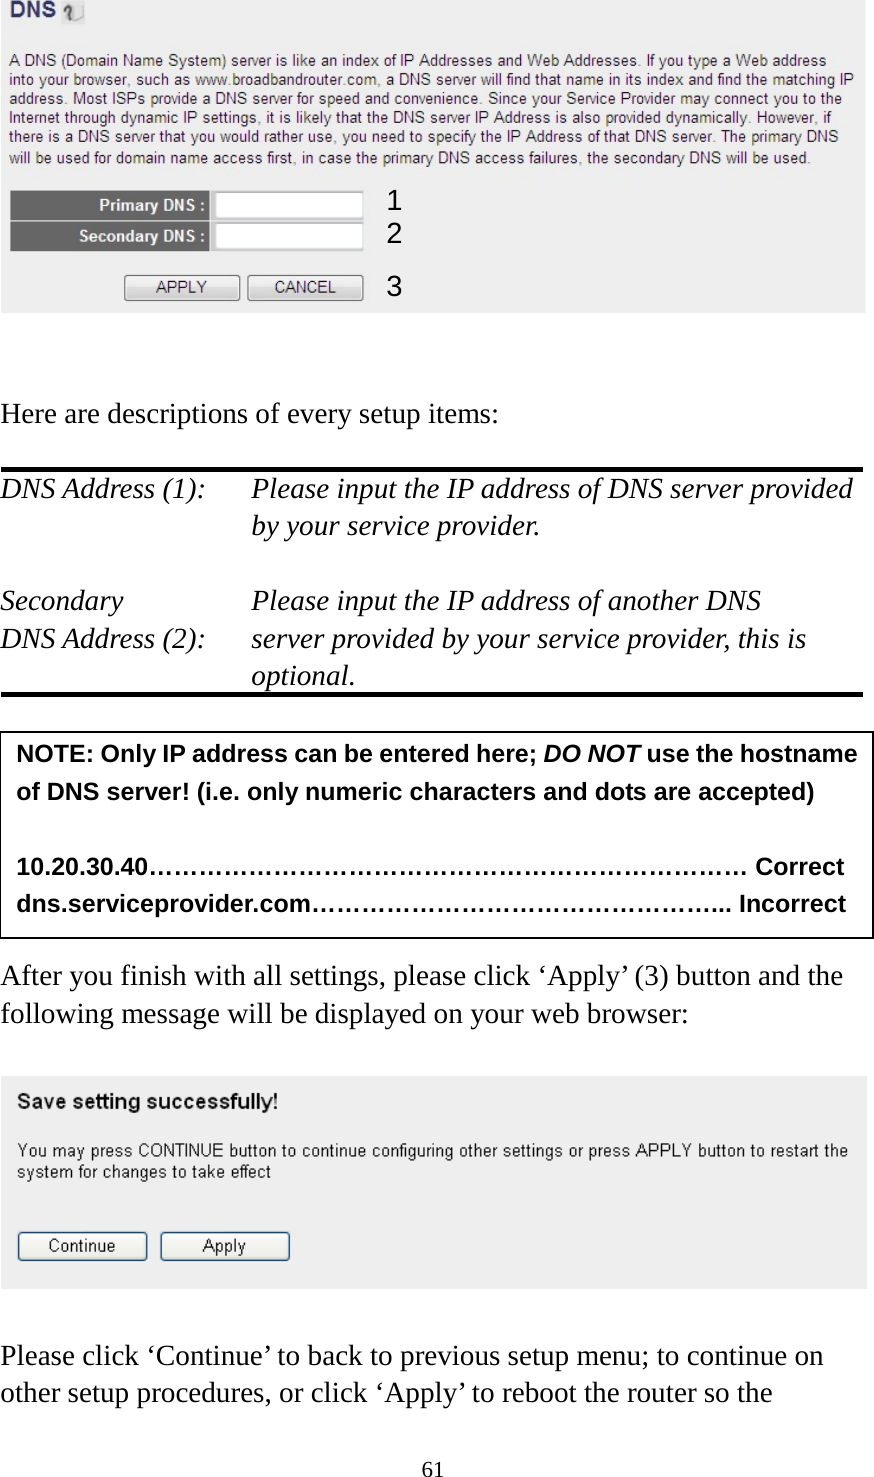 61    Here are descriptions of every setup items:  DNS Address (1):    Please input the IP address of DNS server provided by your service provider.  Secondary        Please input the IP address of another DNS DNS Address (2):    server provided by your service provider, this is optional.        After you finish with all settings, please click ‘Apply’ (3) button and the following message will be displayed on your web browser:    Please click ‘Continue’ to back to previous setup menu; to continue on other setup procedures, or click ‘Apply’ to reboot the router so the NOTE: Only IP address can be entered here; DO NOT use the hostname of DNS server! (i.e. only numeric characters and dots are accepted)  10.20.30.40……………………………………………………………… Correct dns.serviceprovider.com…………………………………………... Incorrect  1 2 3 